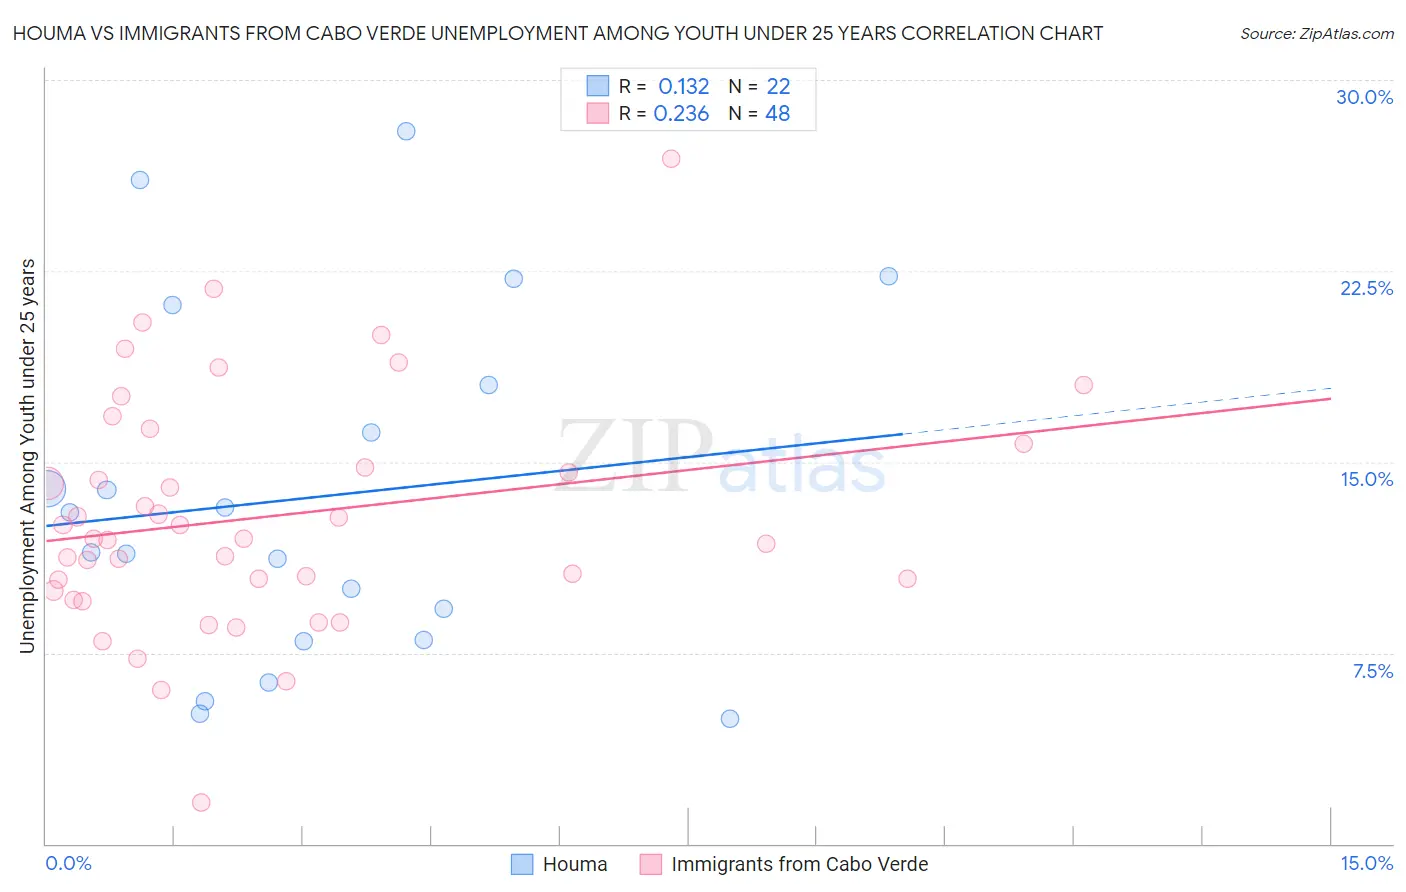 Houma vs Immigrants from Cabo Verde Unemployment Among Youth under 25 years